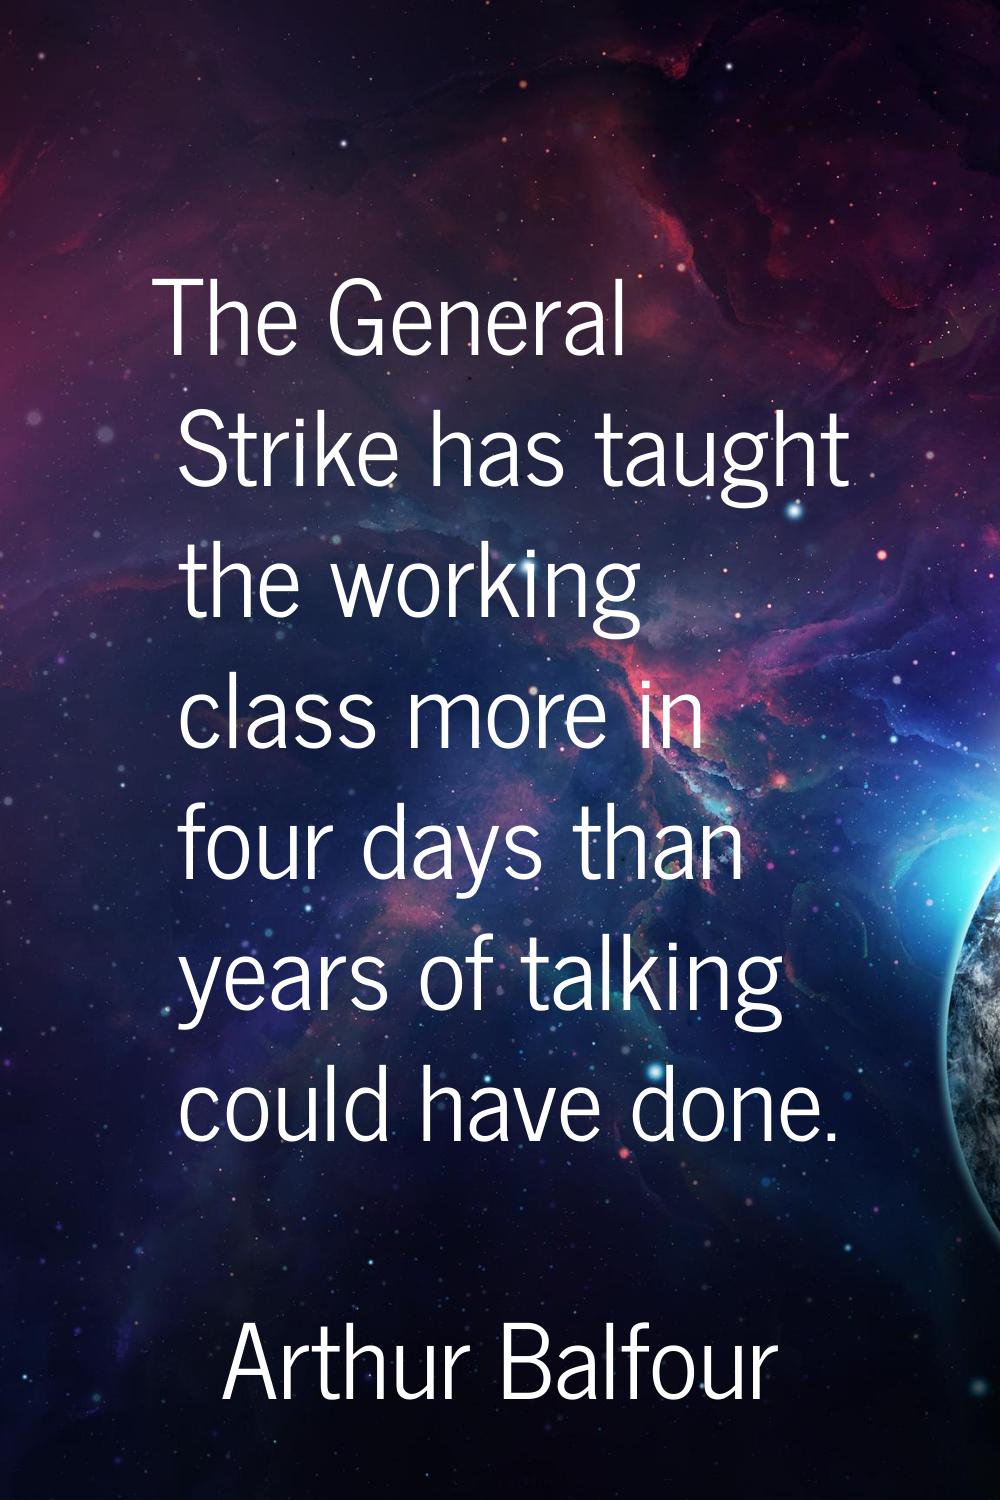 The General Strike has taught the working class more in four days than years of talking could have 